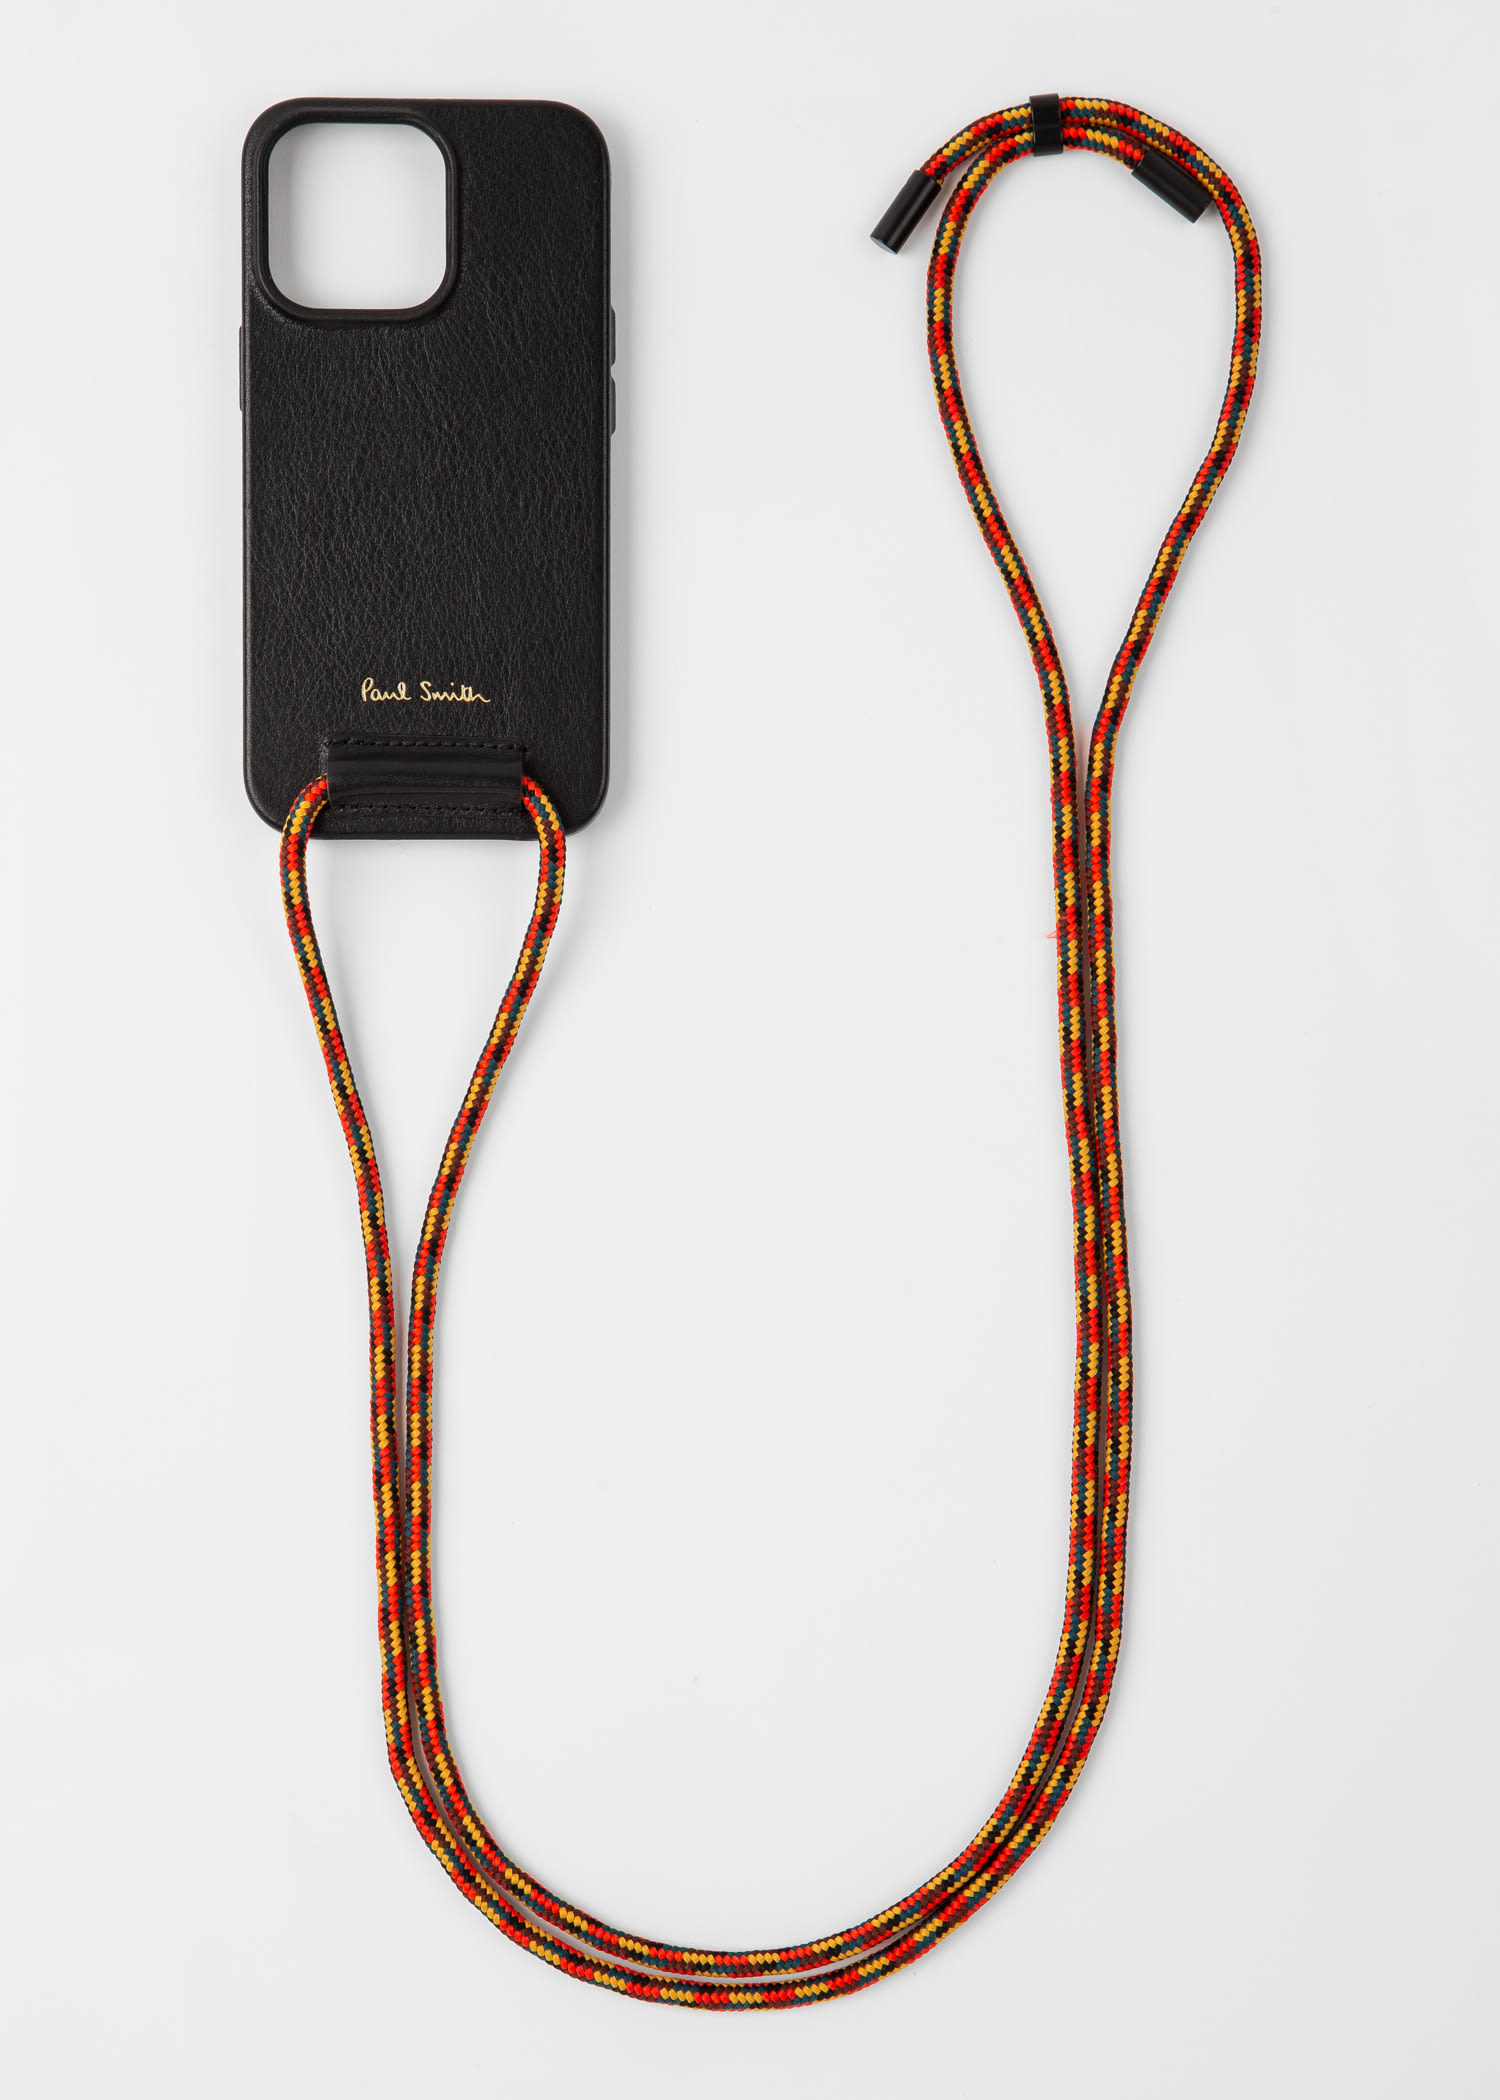 Black Leather iPhone 13 Pro Case With Rope Lanyard - Paul Smith US